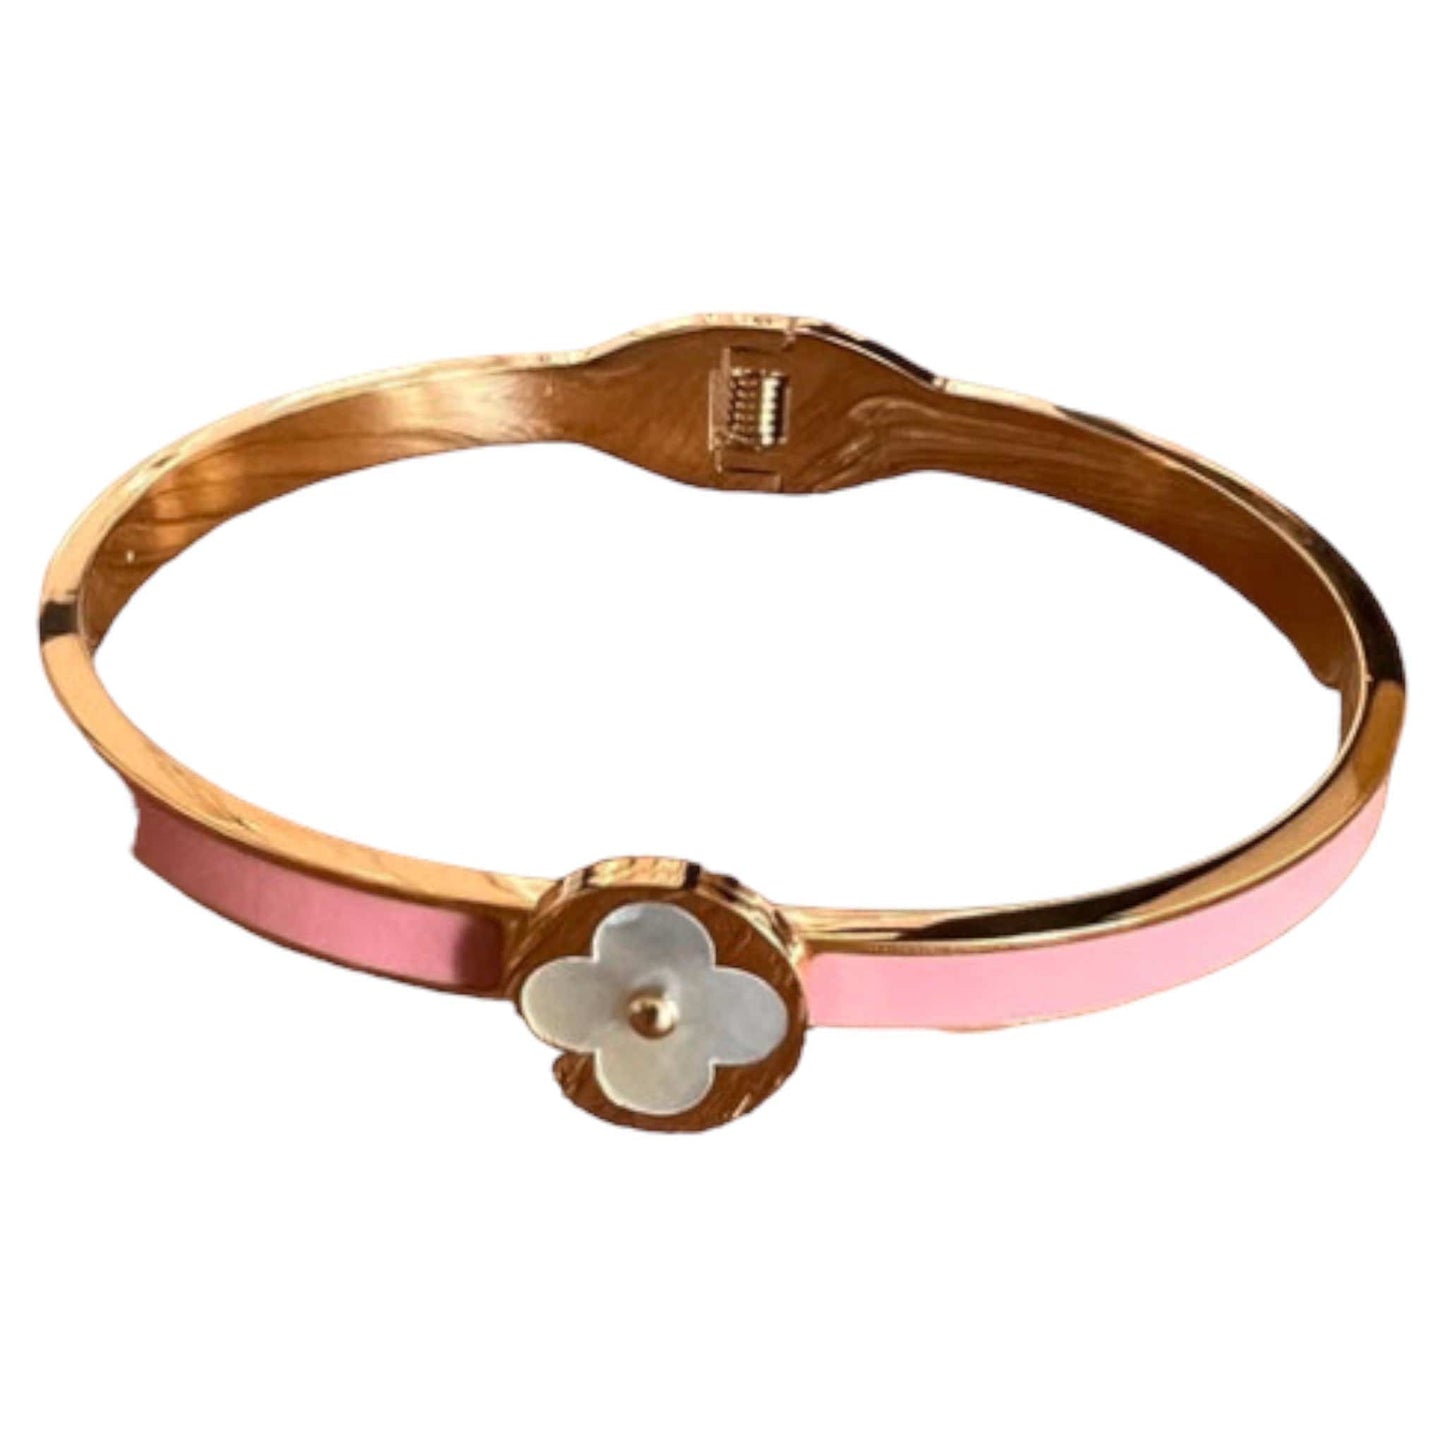 Stainless Clover Bracelet - multiple colors available